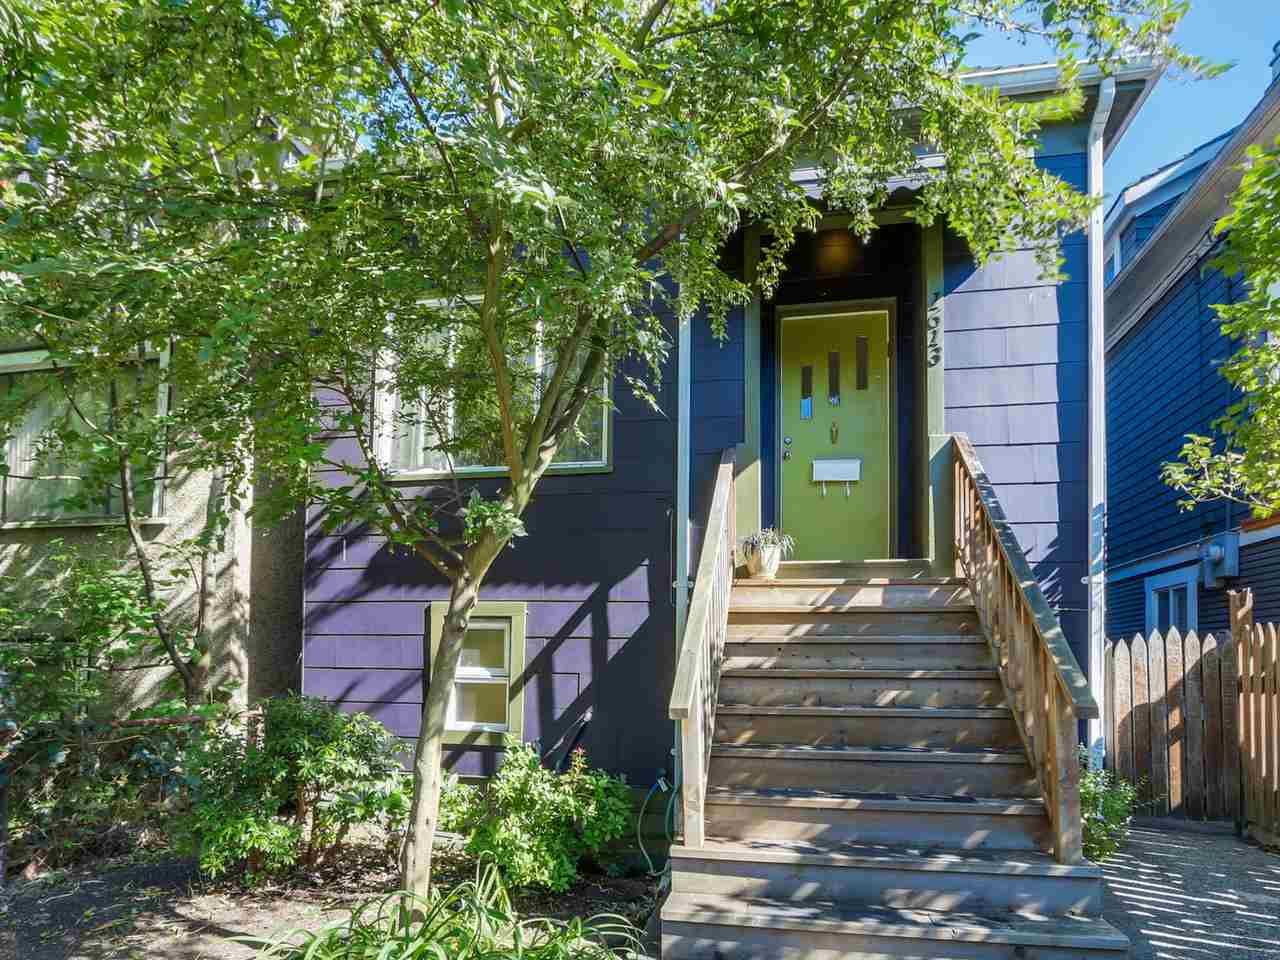 Main Photo: 1613 E 4TH AVENUE in Vancouver: Grandview VE House for sale (Vancouver East)  : MLS®# R2096953